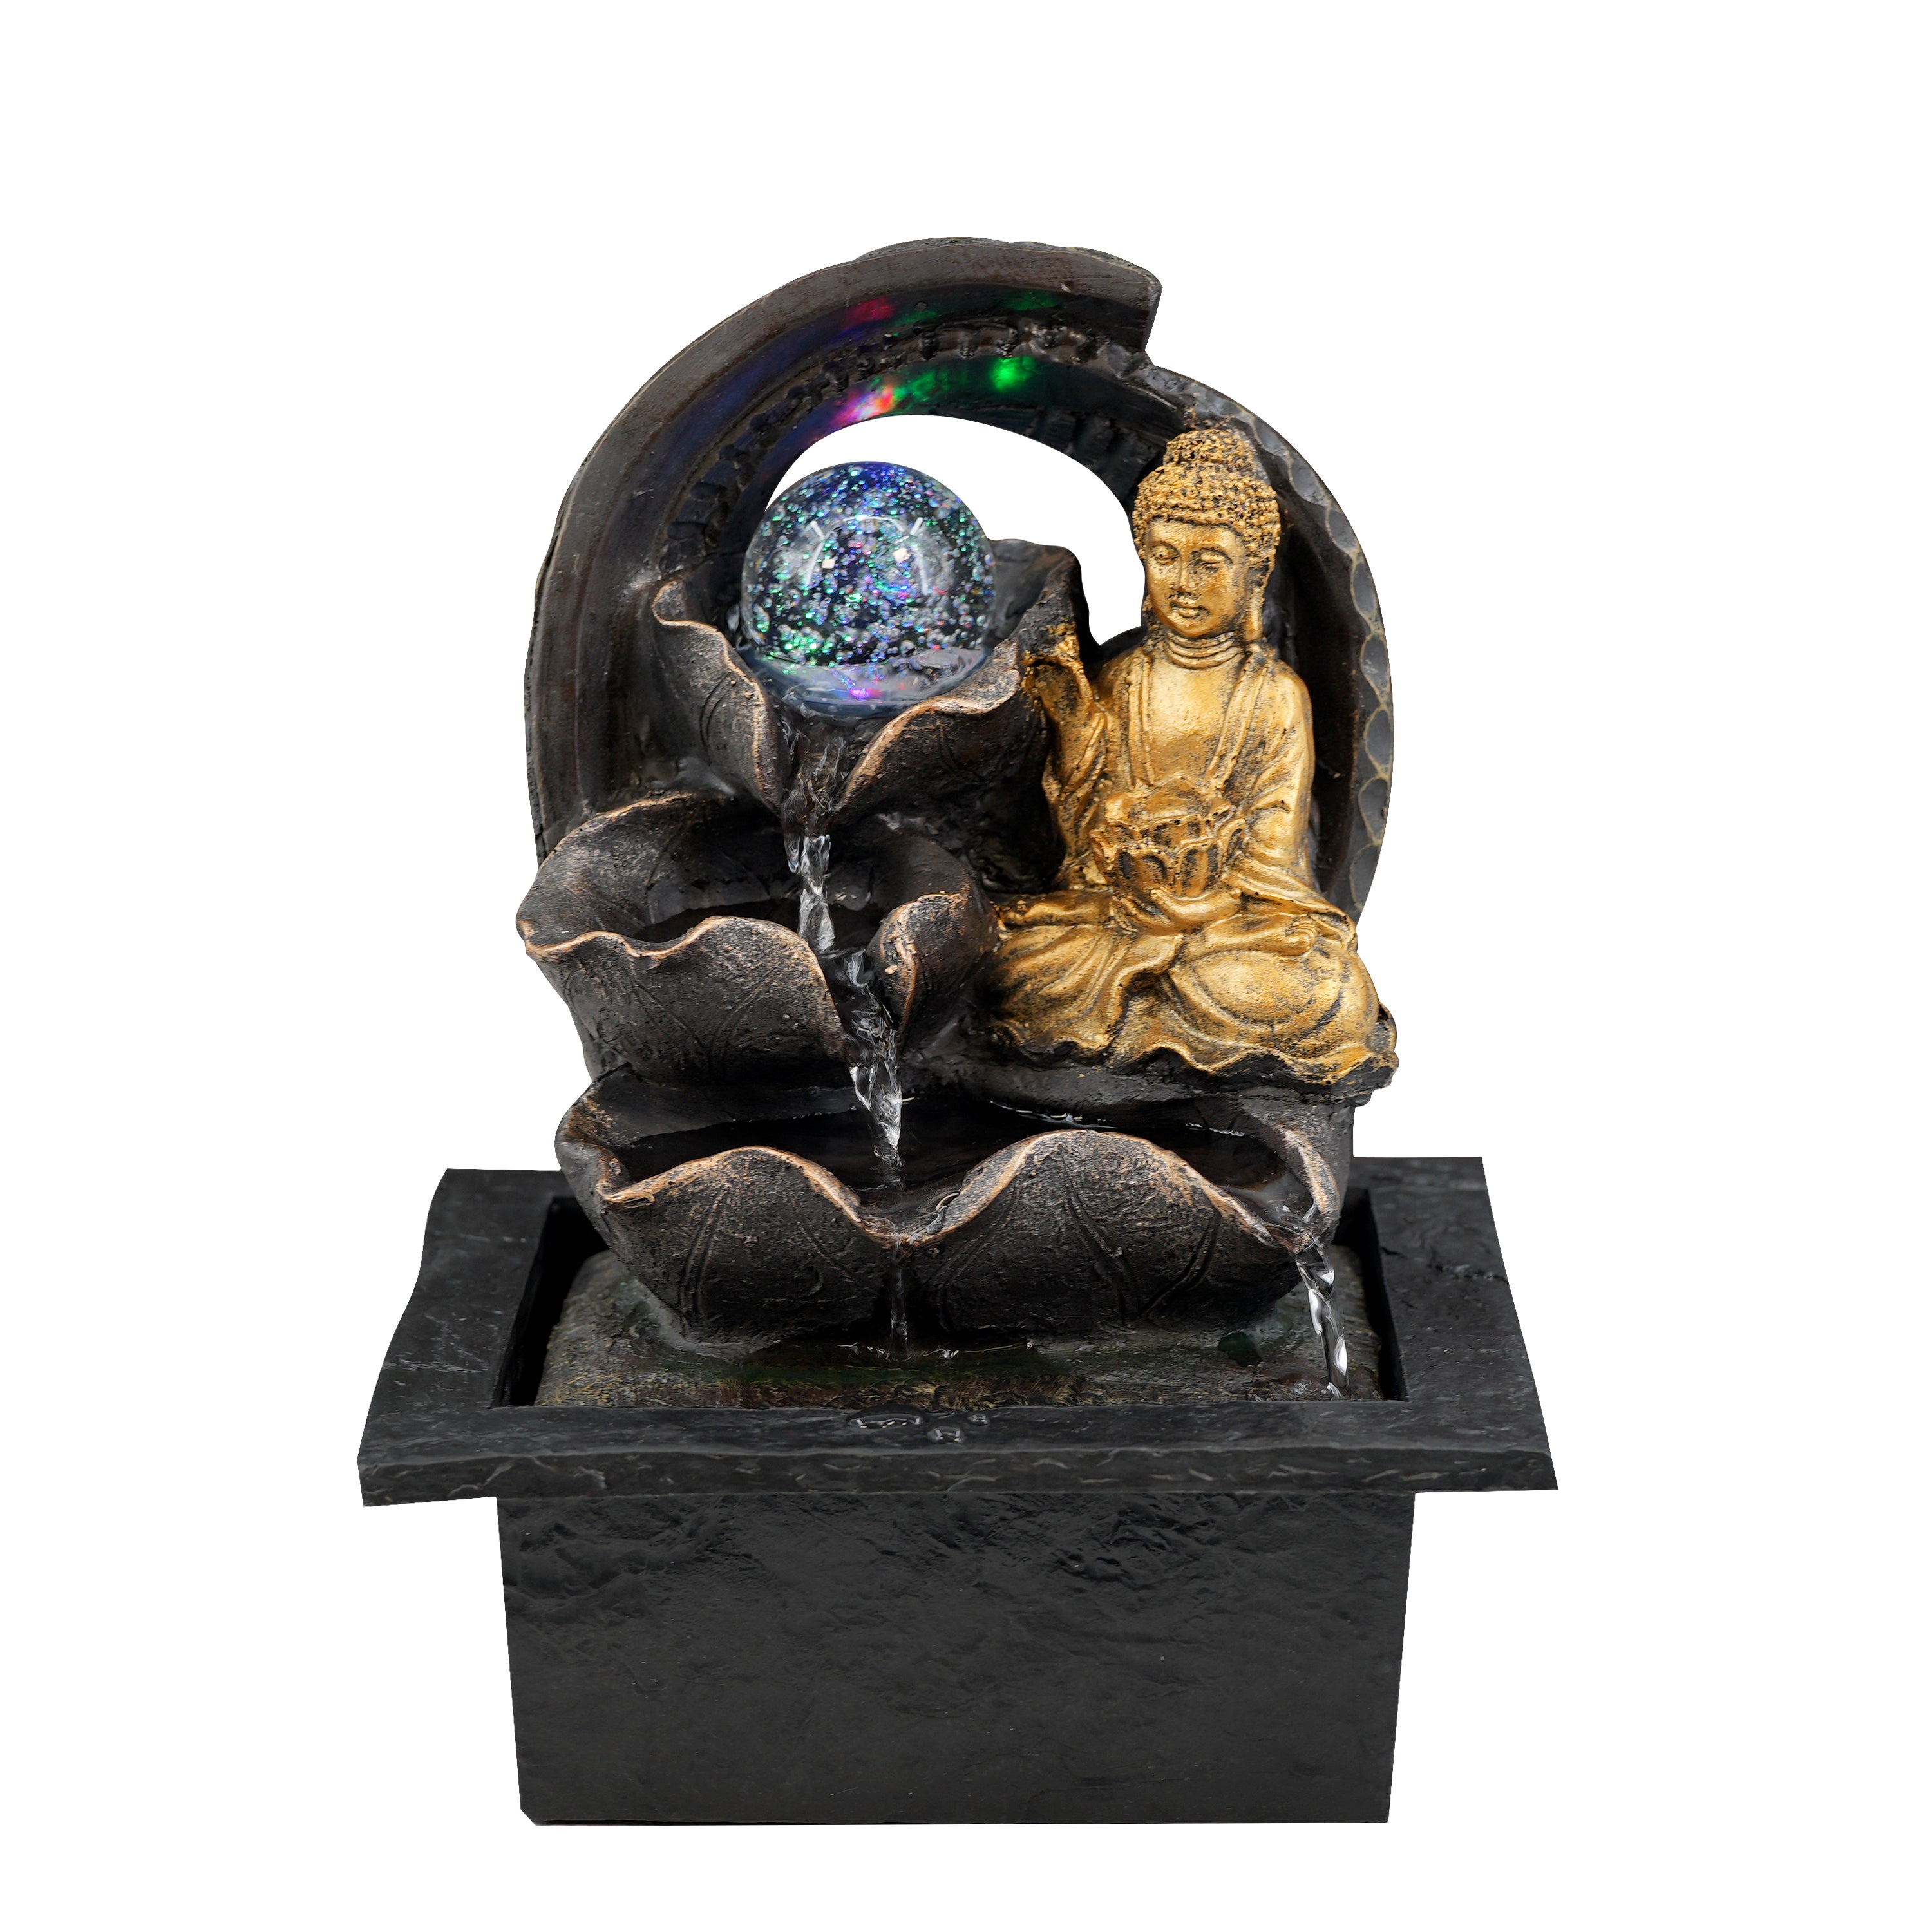 Crystal Ball Buddha Water Feature Led Lights GEEZY - The Magic Toy Shop